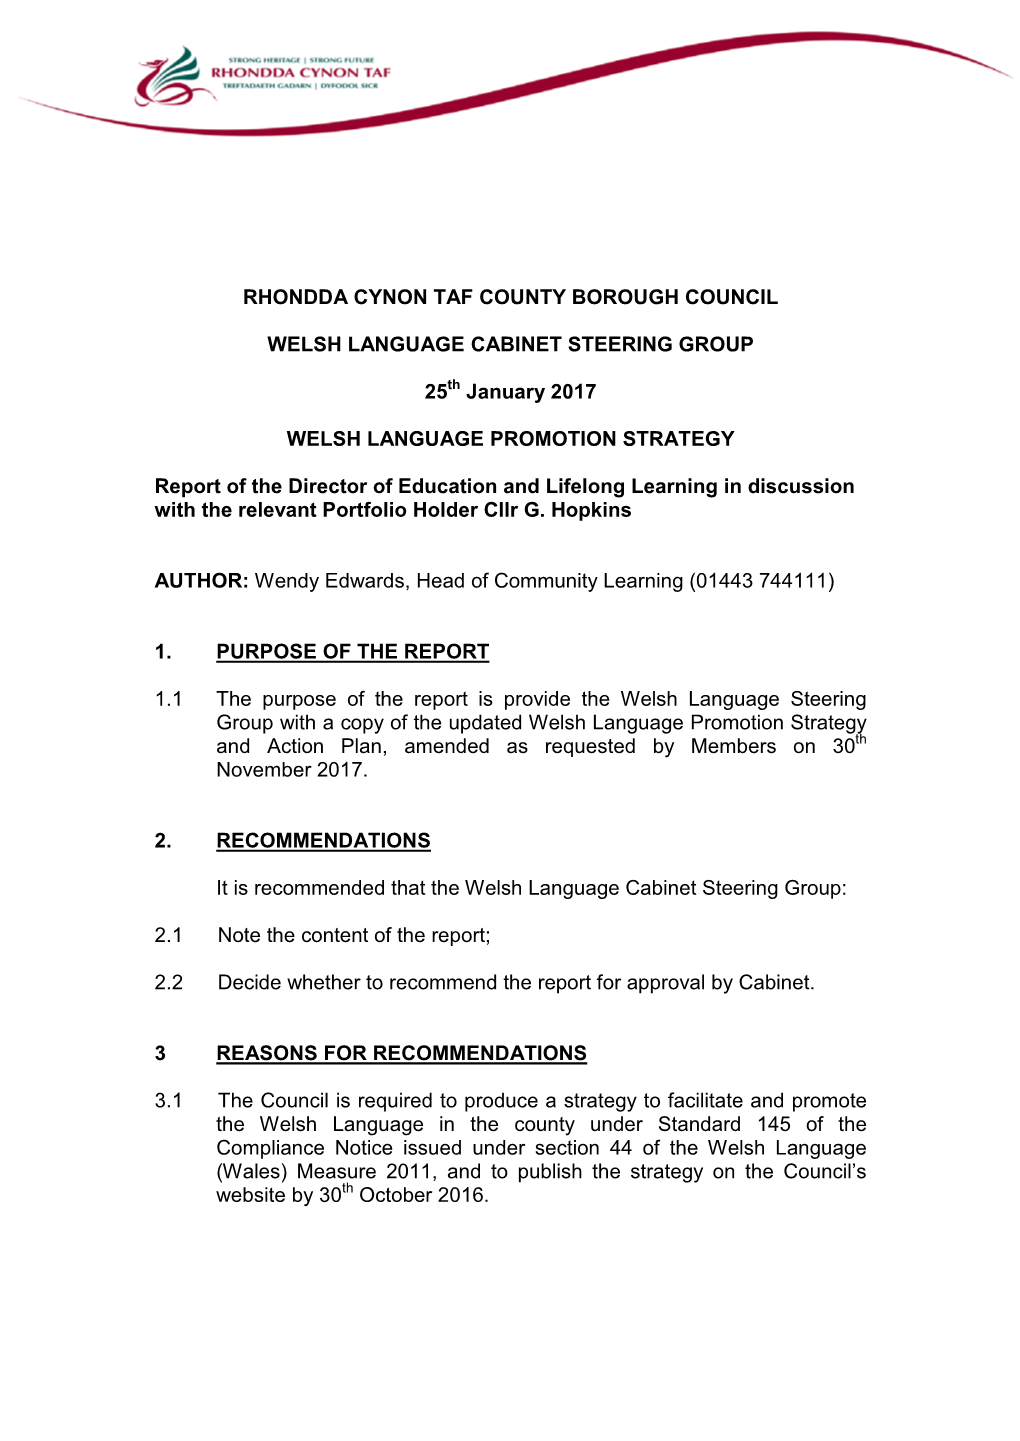 RHONDDA CYNON TAF COUNTY BOROUGH COUNCIL WELSH LANGUAGE CABINET STEERING GROUP 25 January 2017 WELSH LANGUAGE PROMOTION STRATEGY